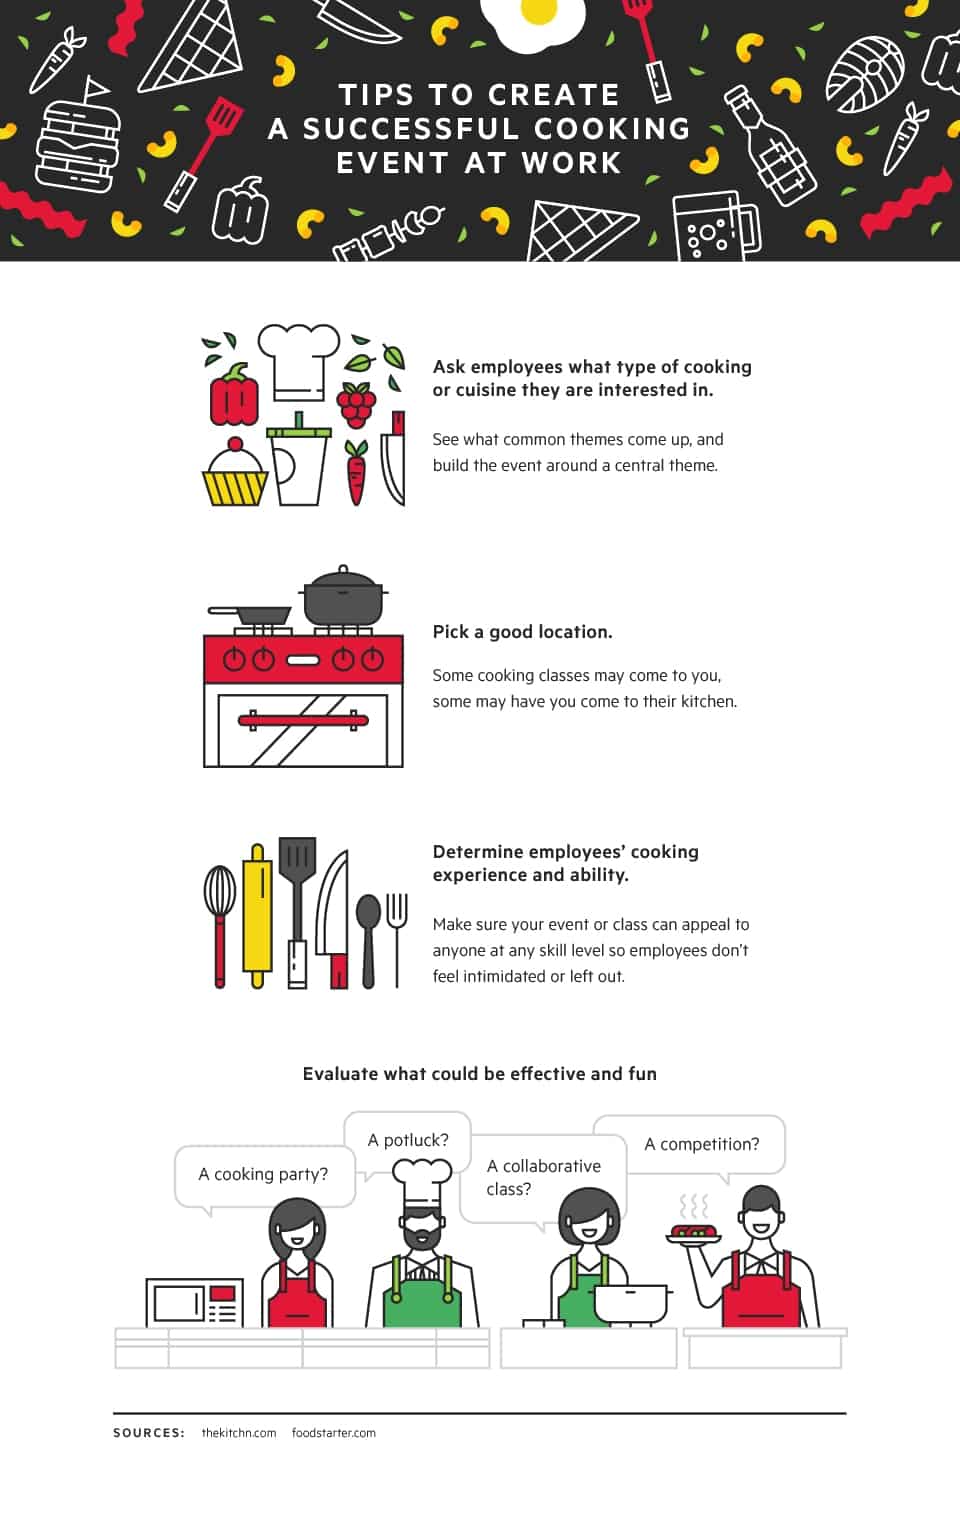 Tips to create a successful cooking event at work